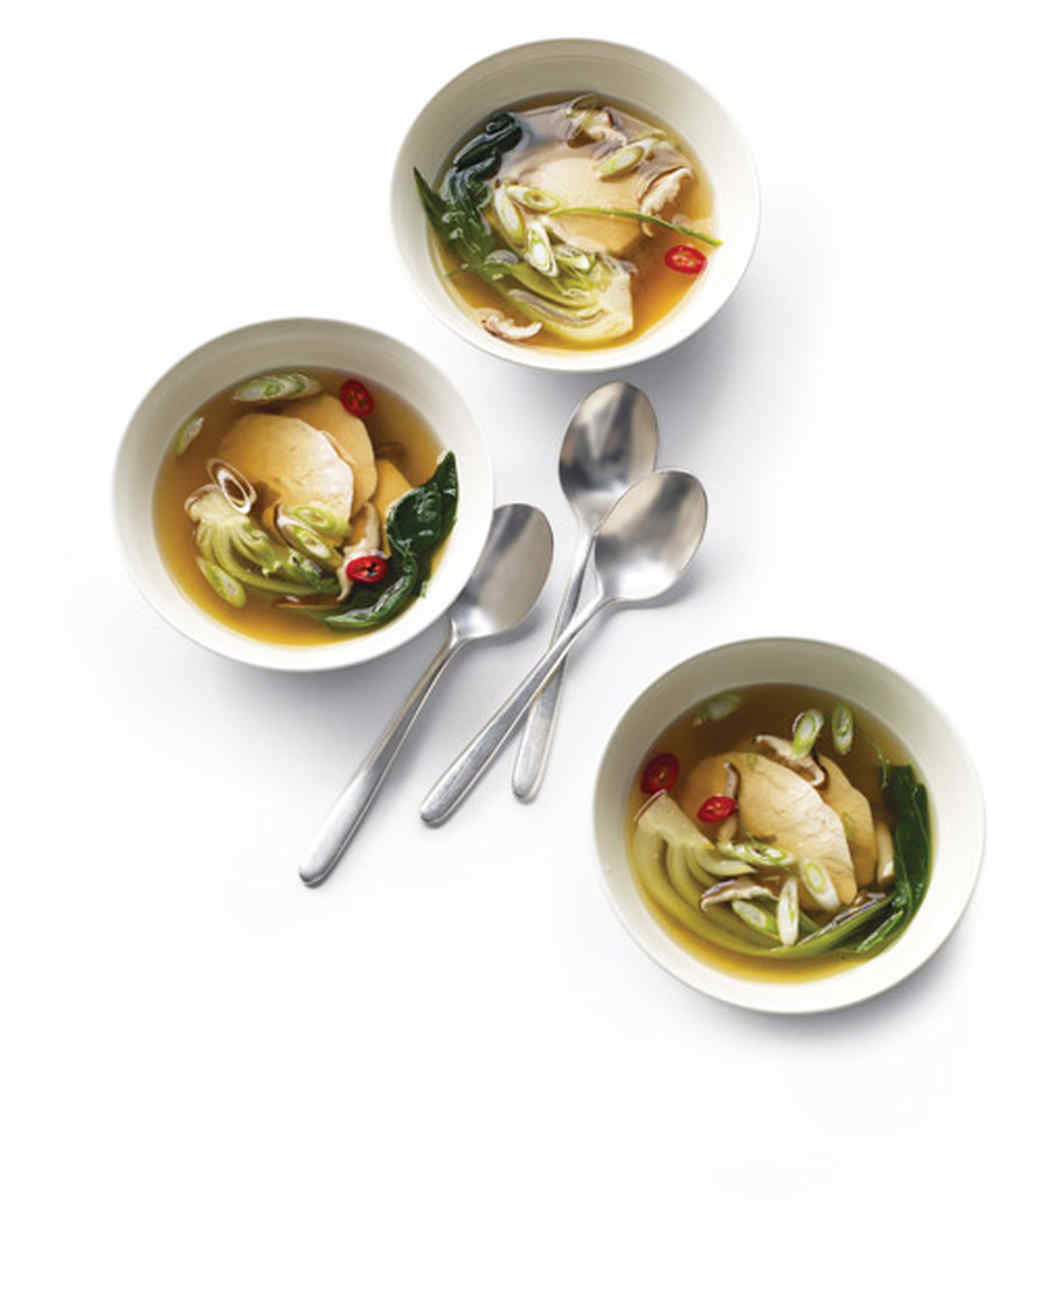 Poached Chicken with Bok Choy in Ginger Broth